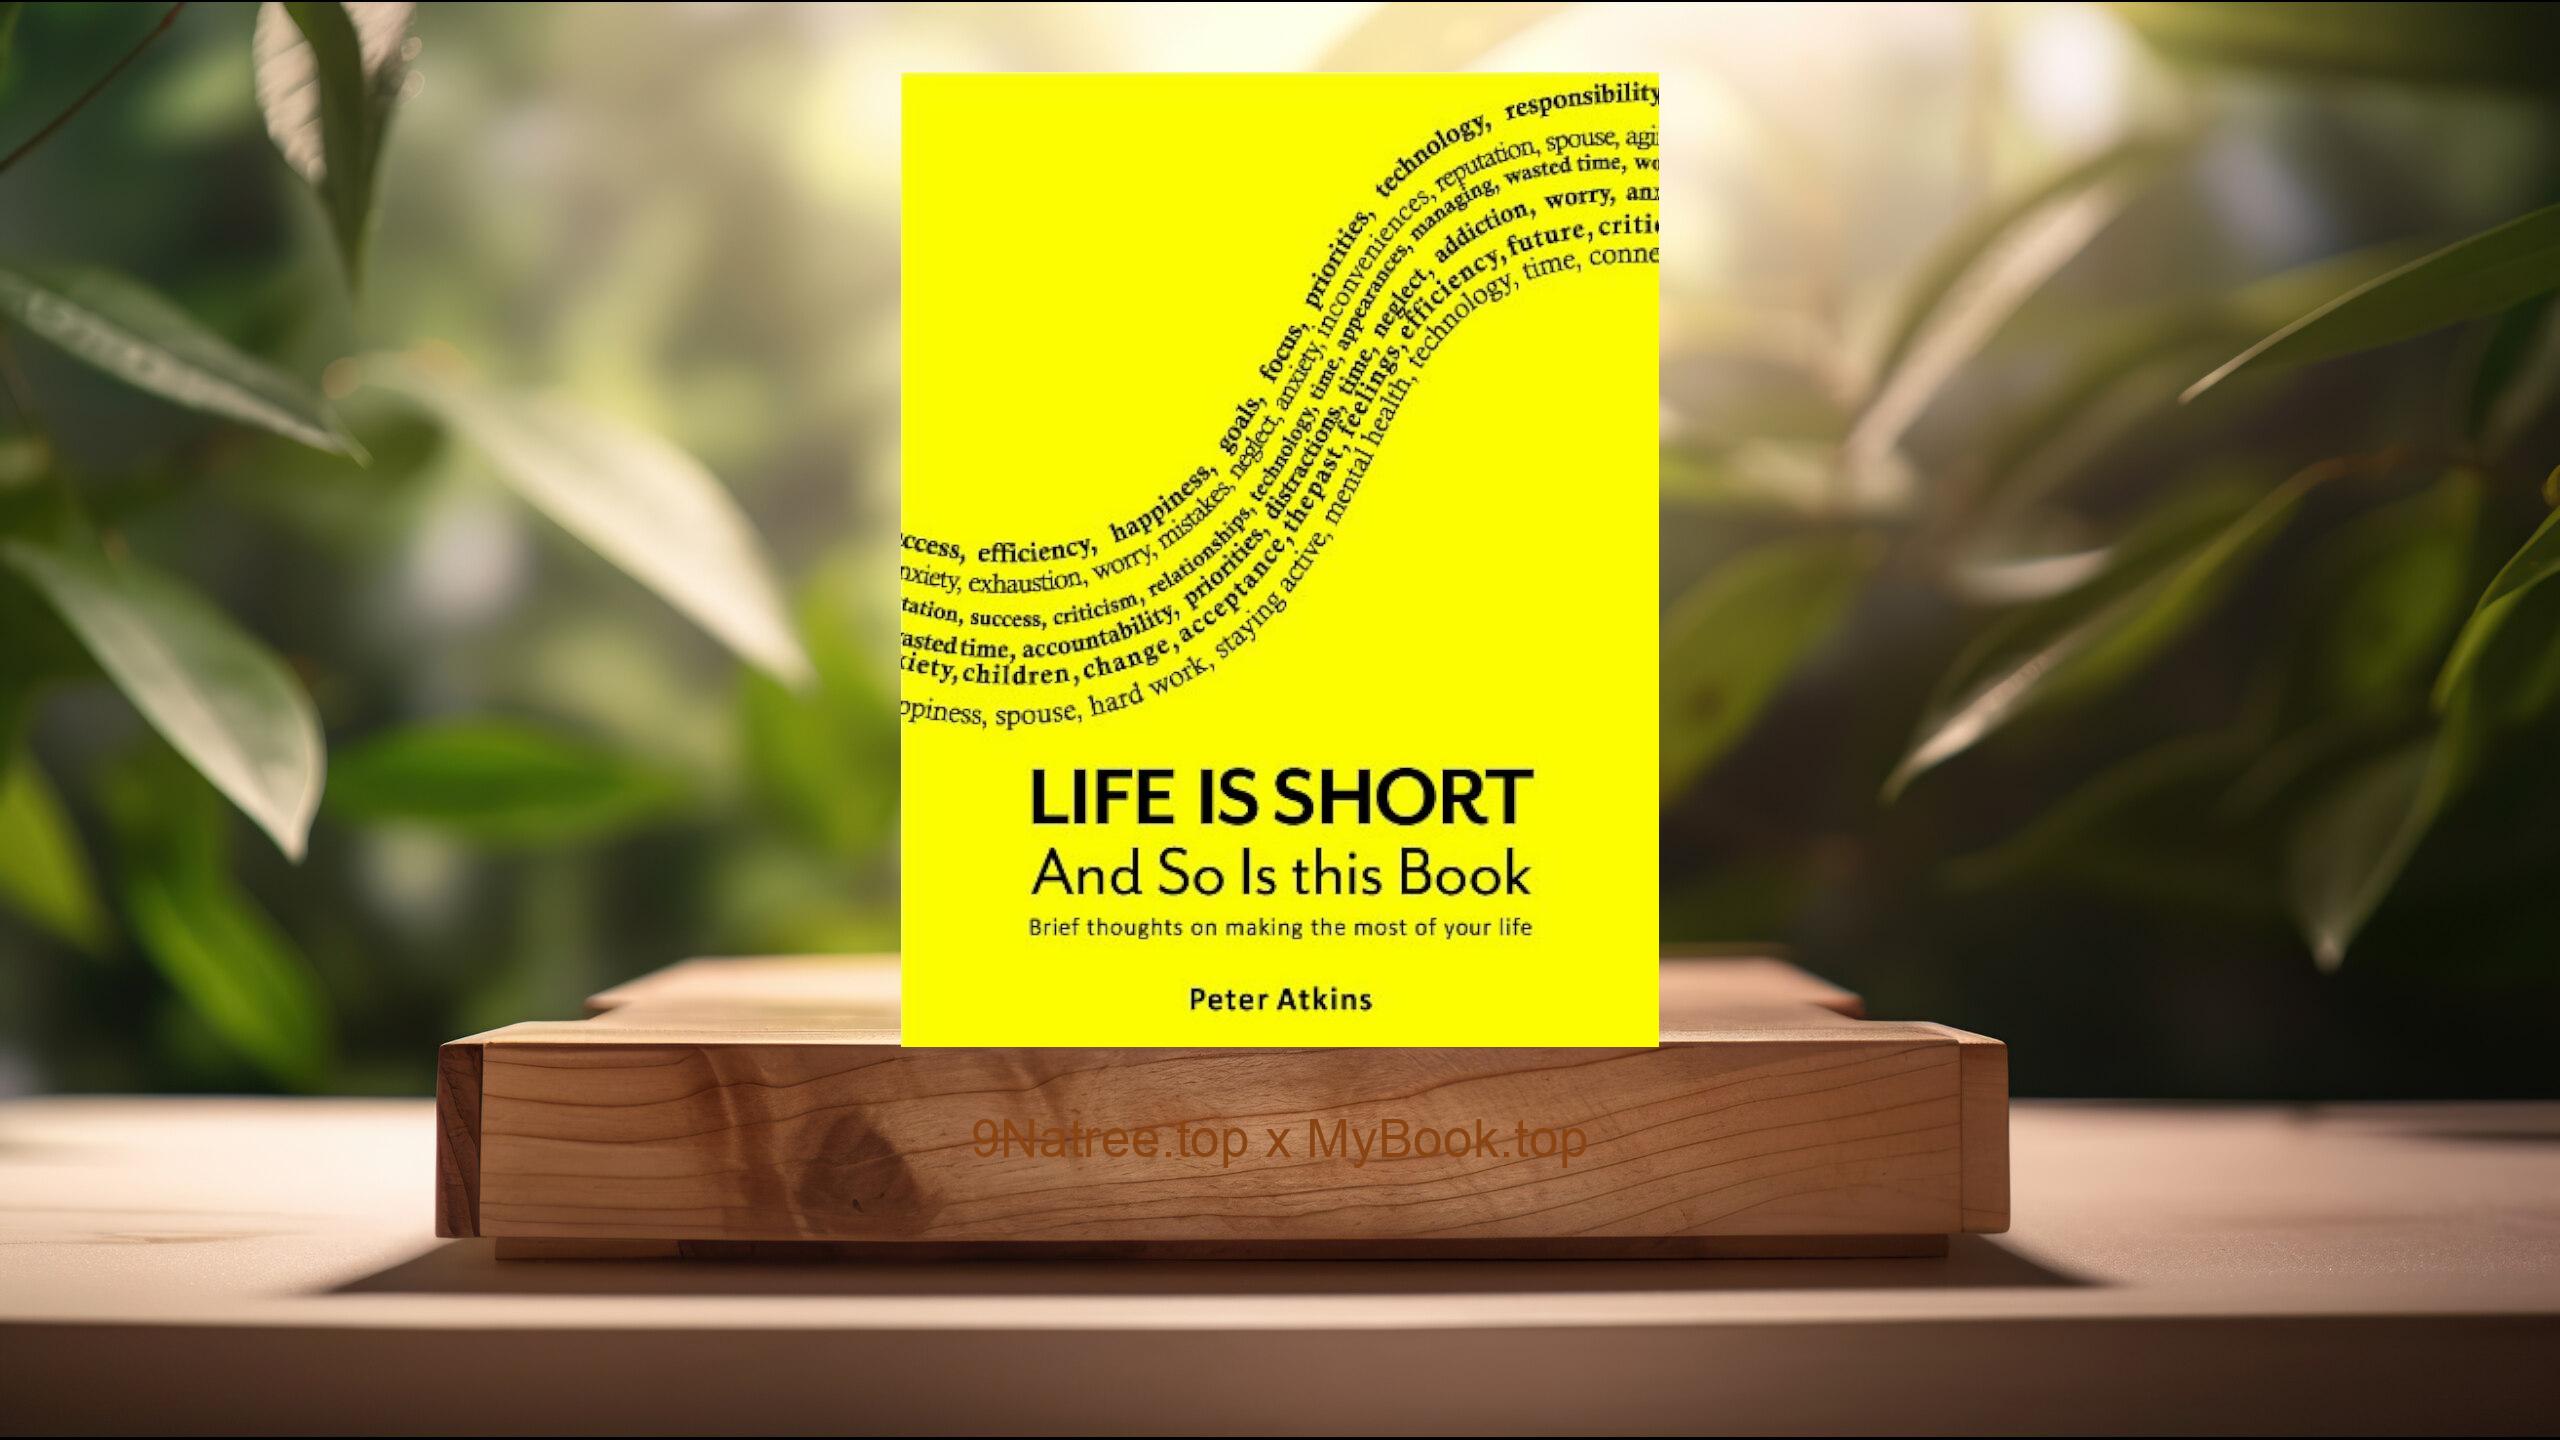 [Review] Life is Short And So Is This Book: Brief Thoughts On Making The Most Of Your Life (Peter Atkins) Summarized